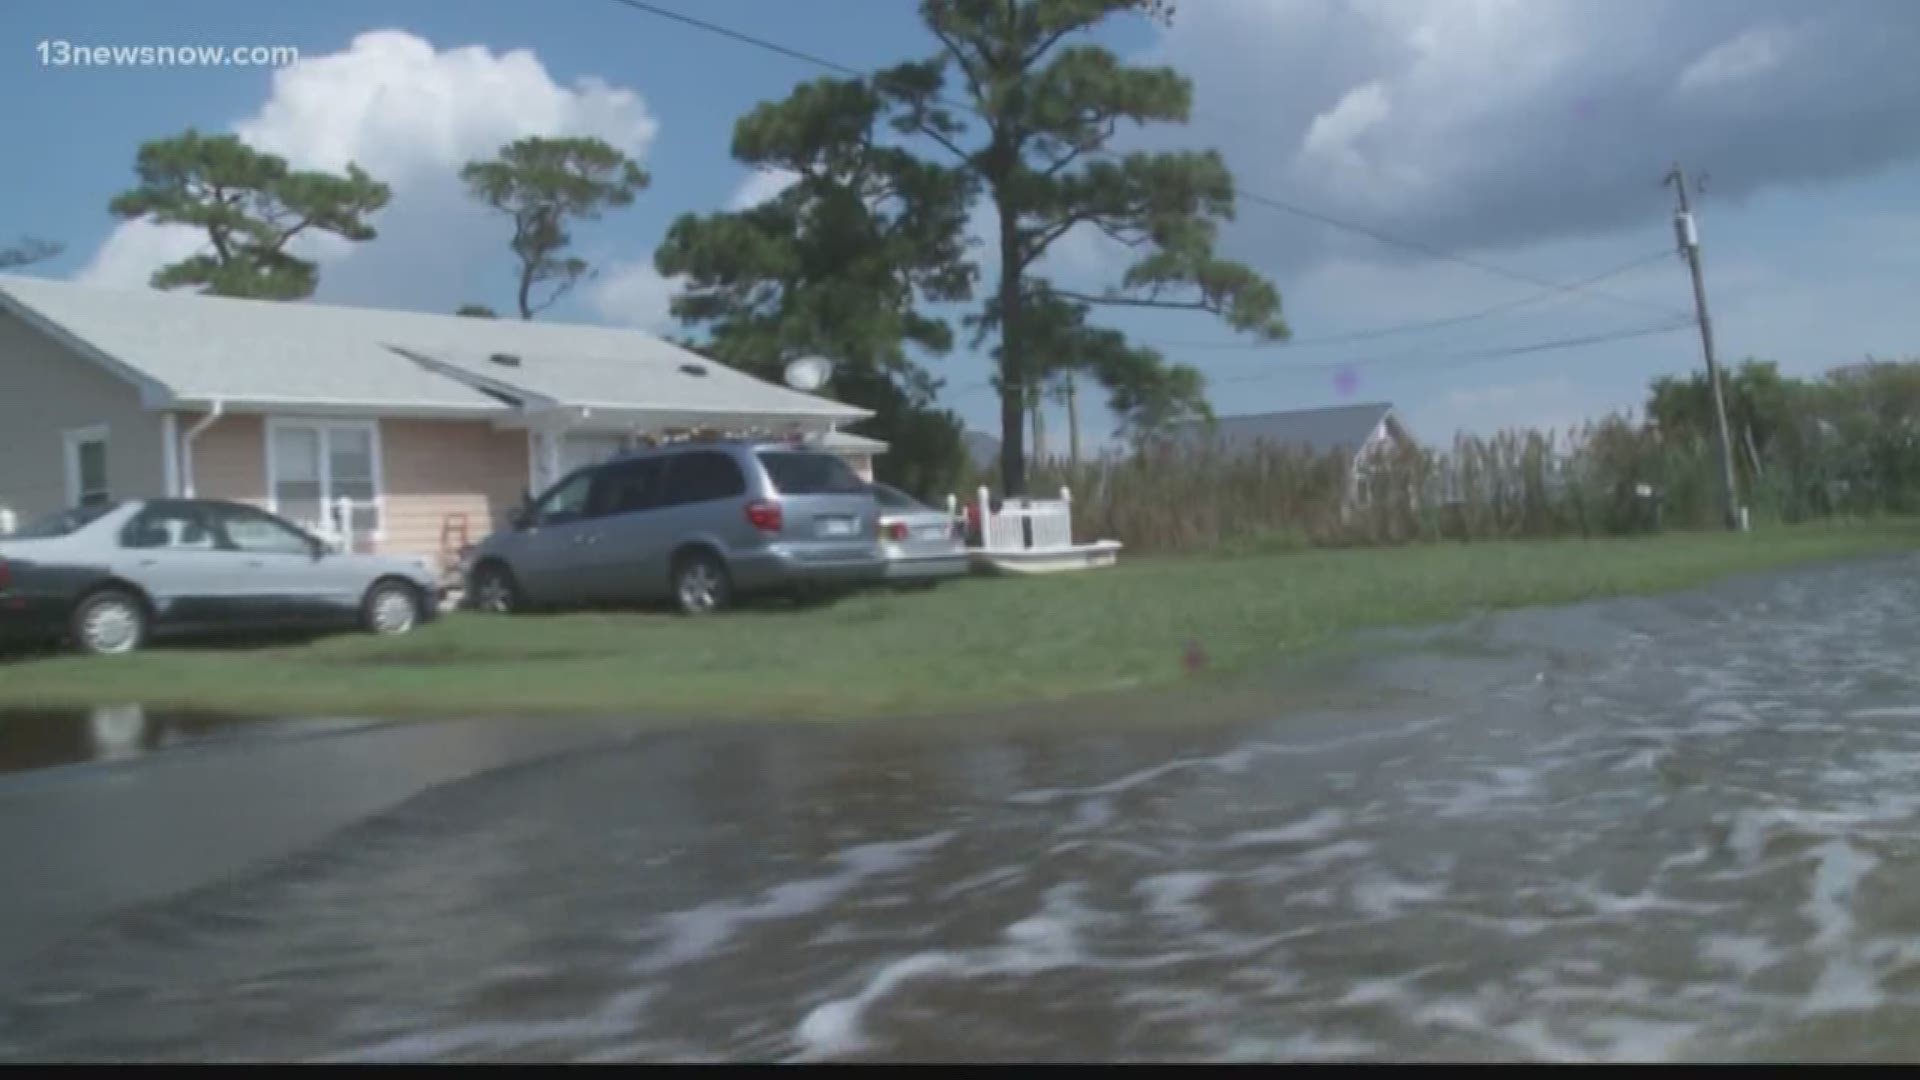 Neighbors are still dealing with flooding days after Hurricane Florence